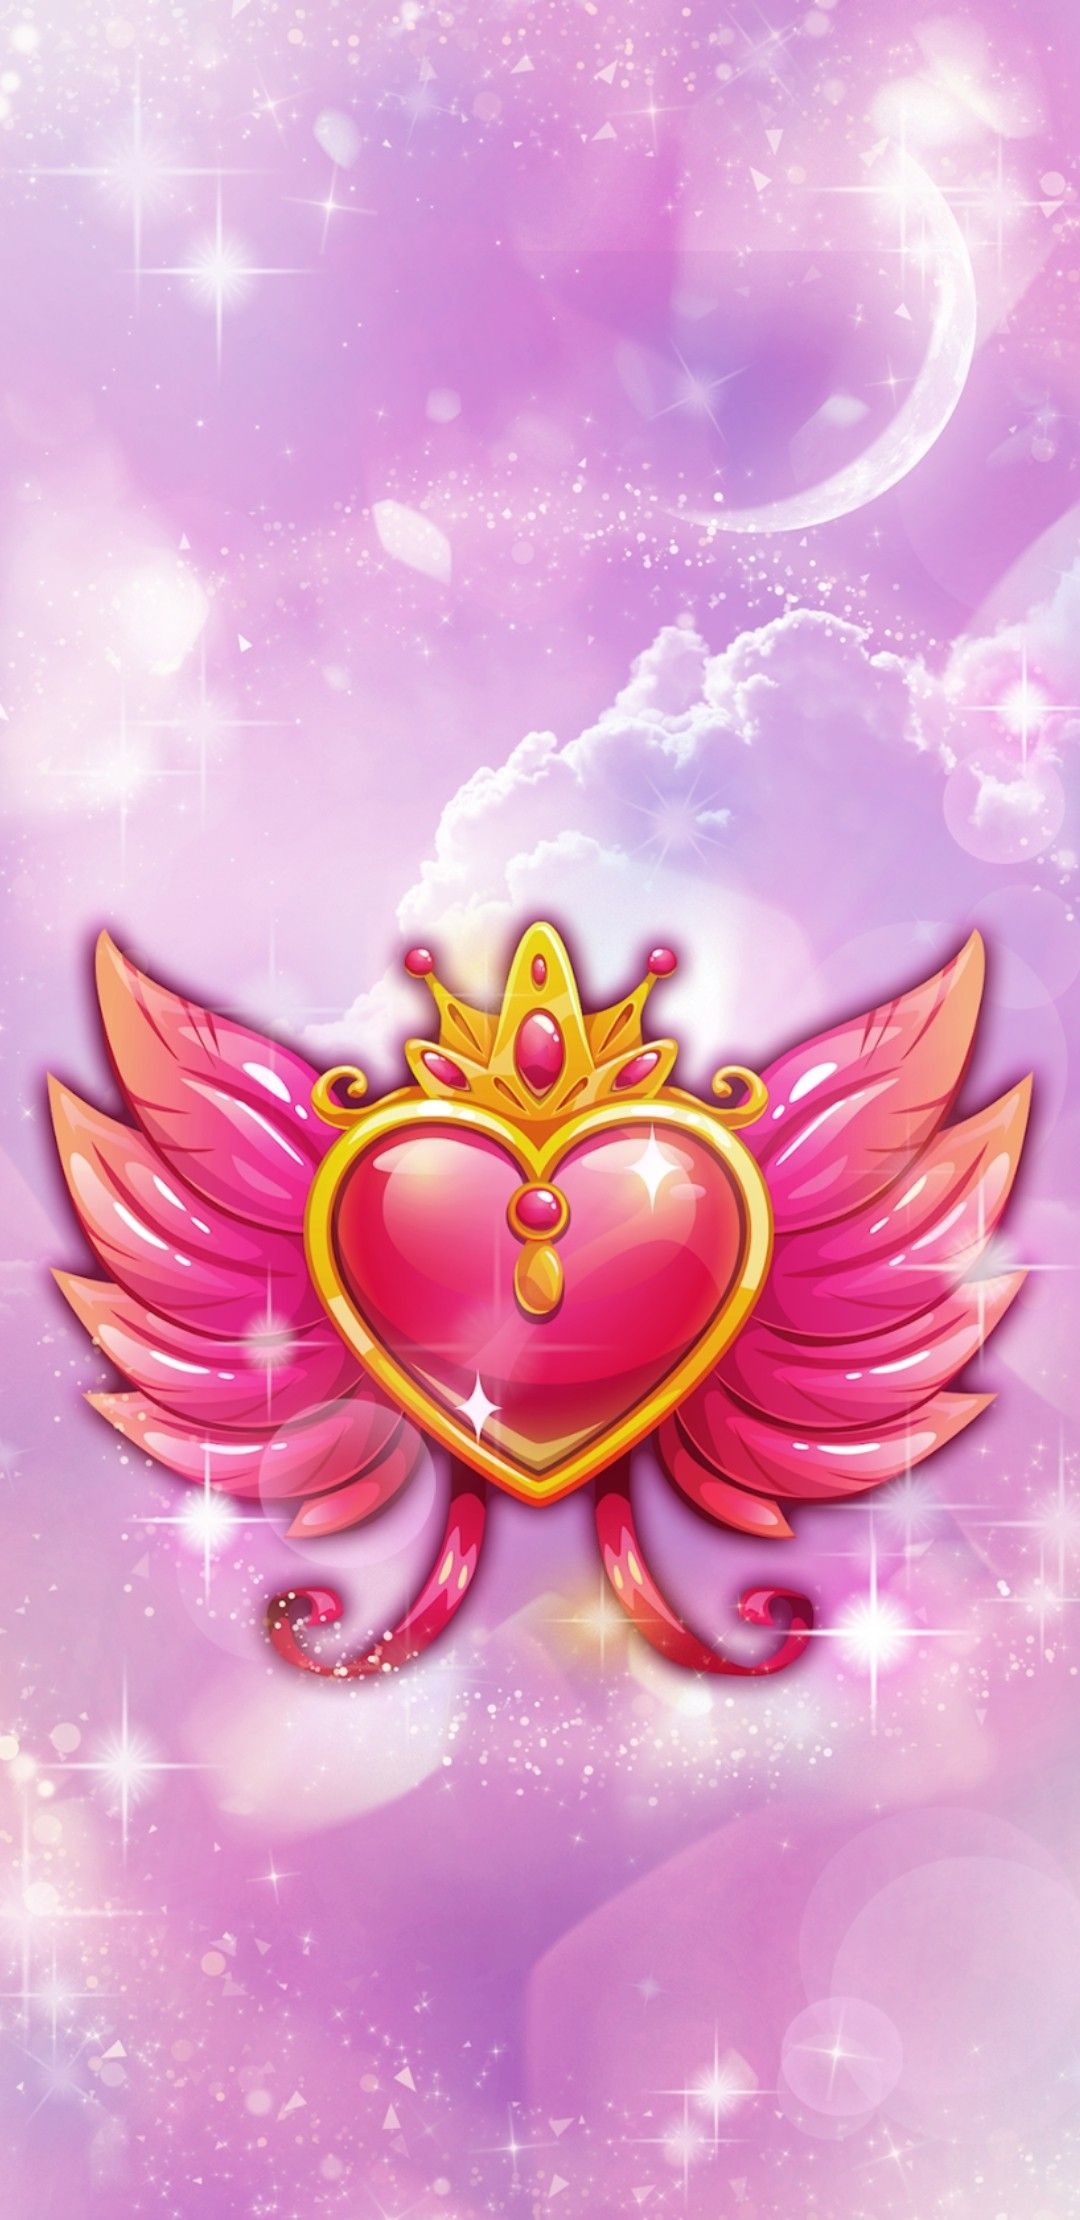 Heart With Wings, Wings wallpaper, Cute design, Whimsical imagery, 1080x2220 HD Handy